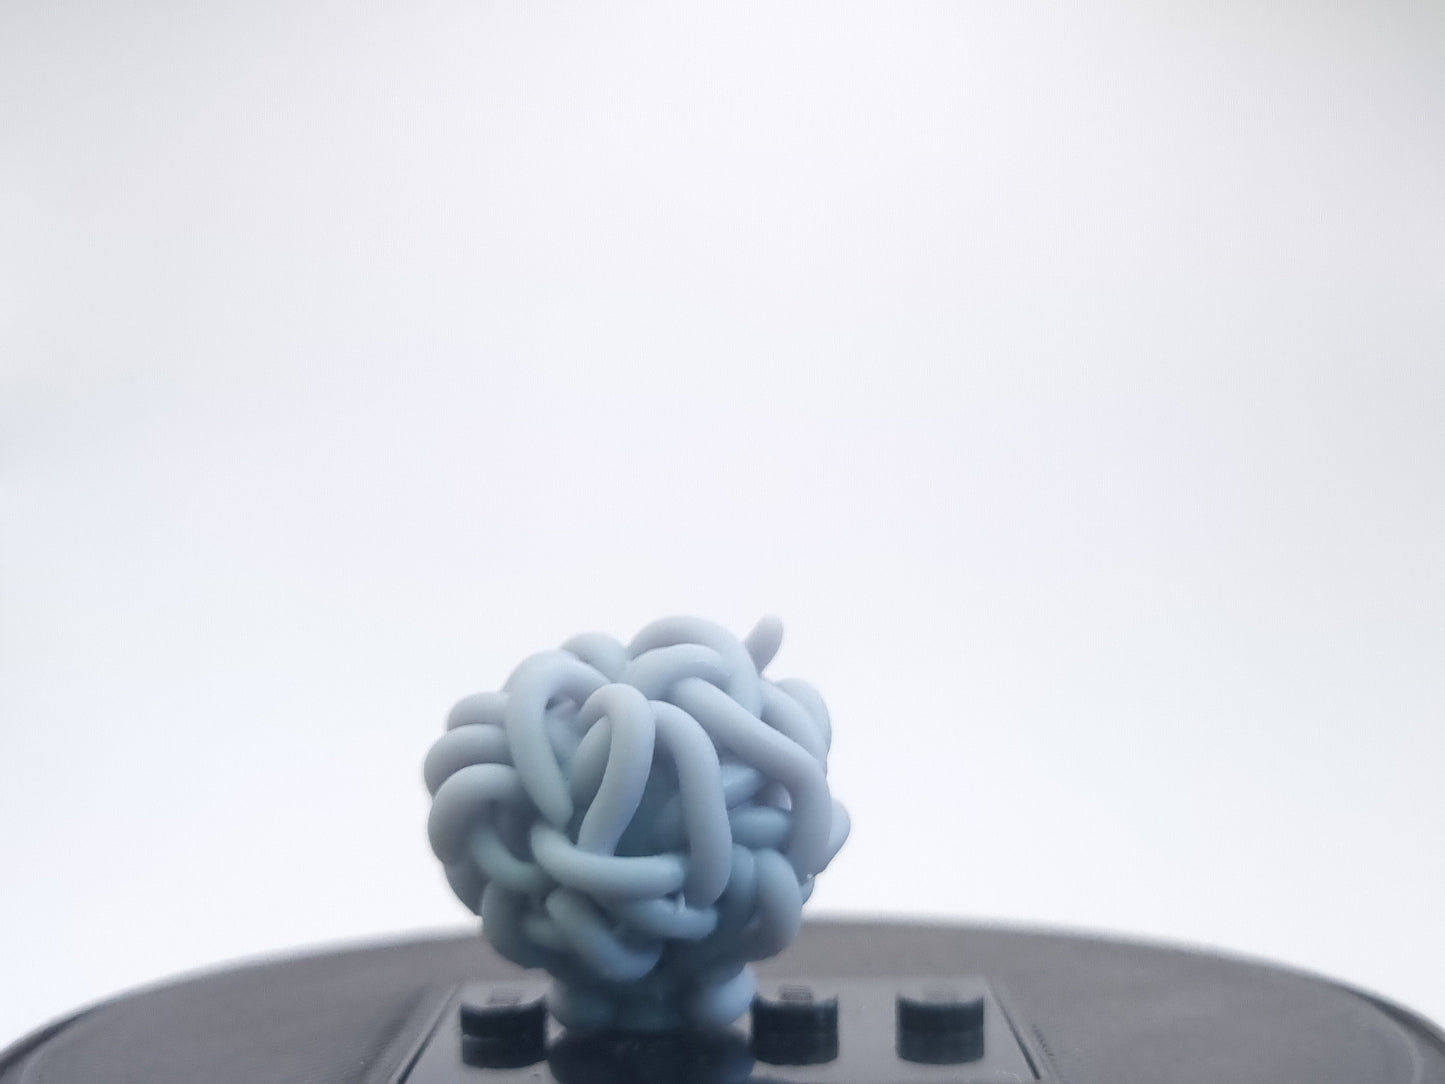 Building toy custom 3D printed Curly ball!